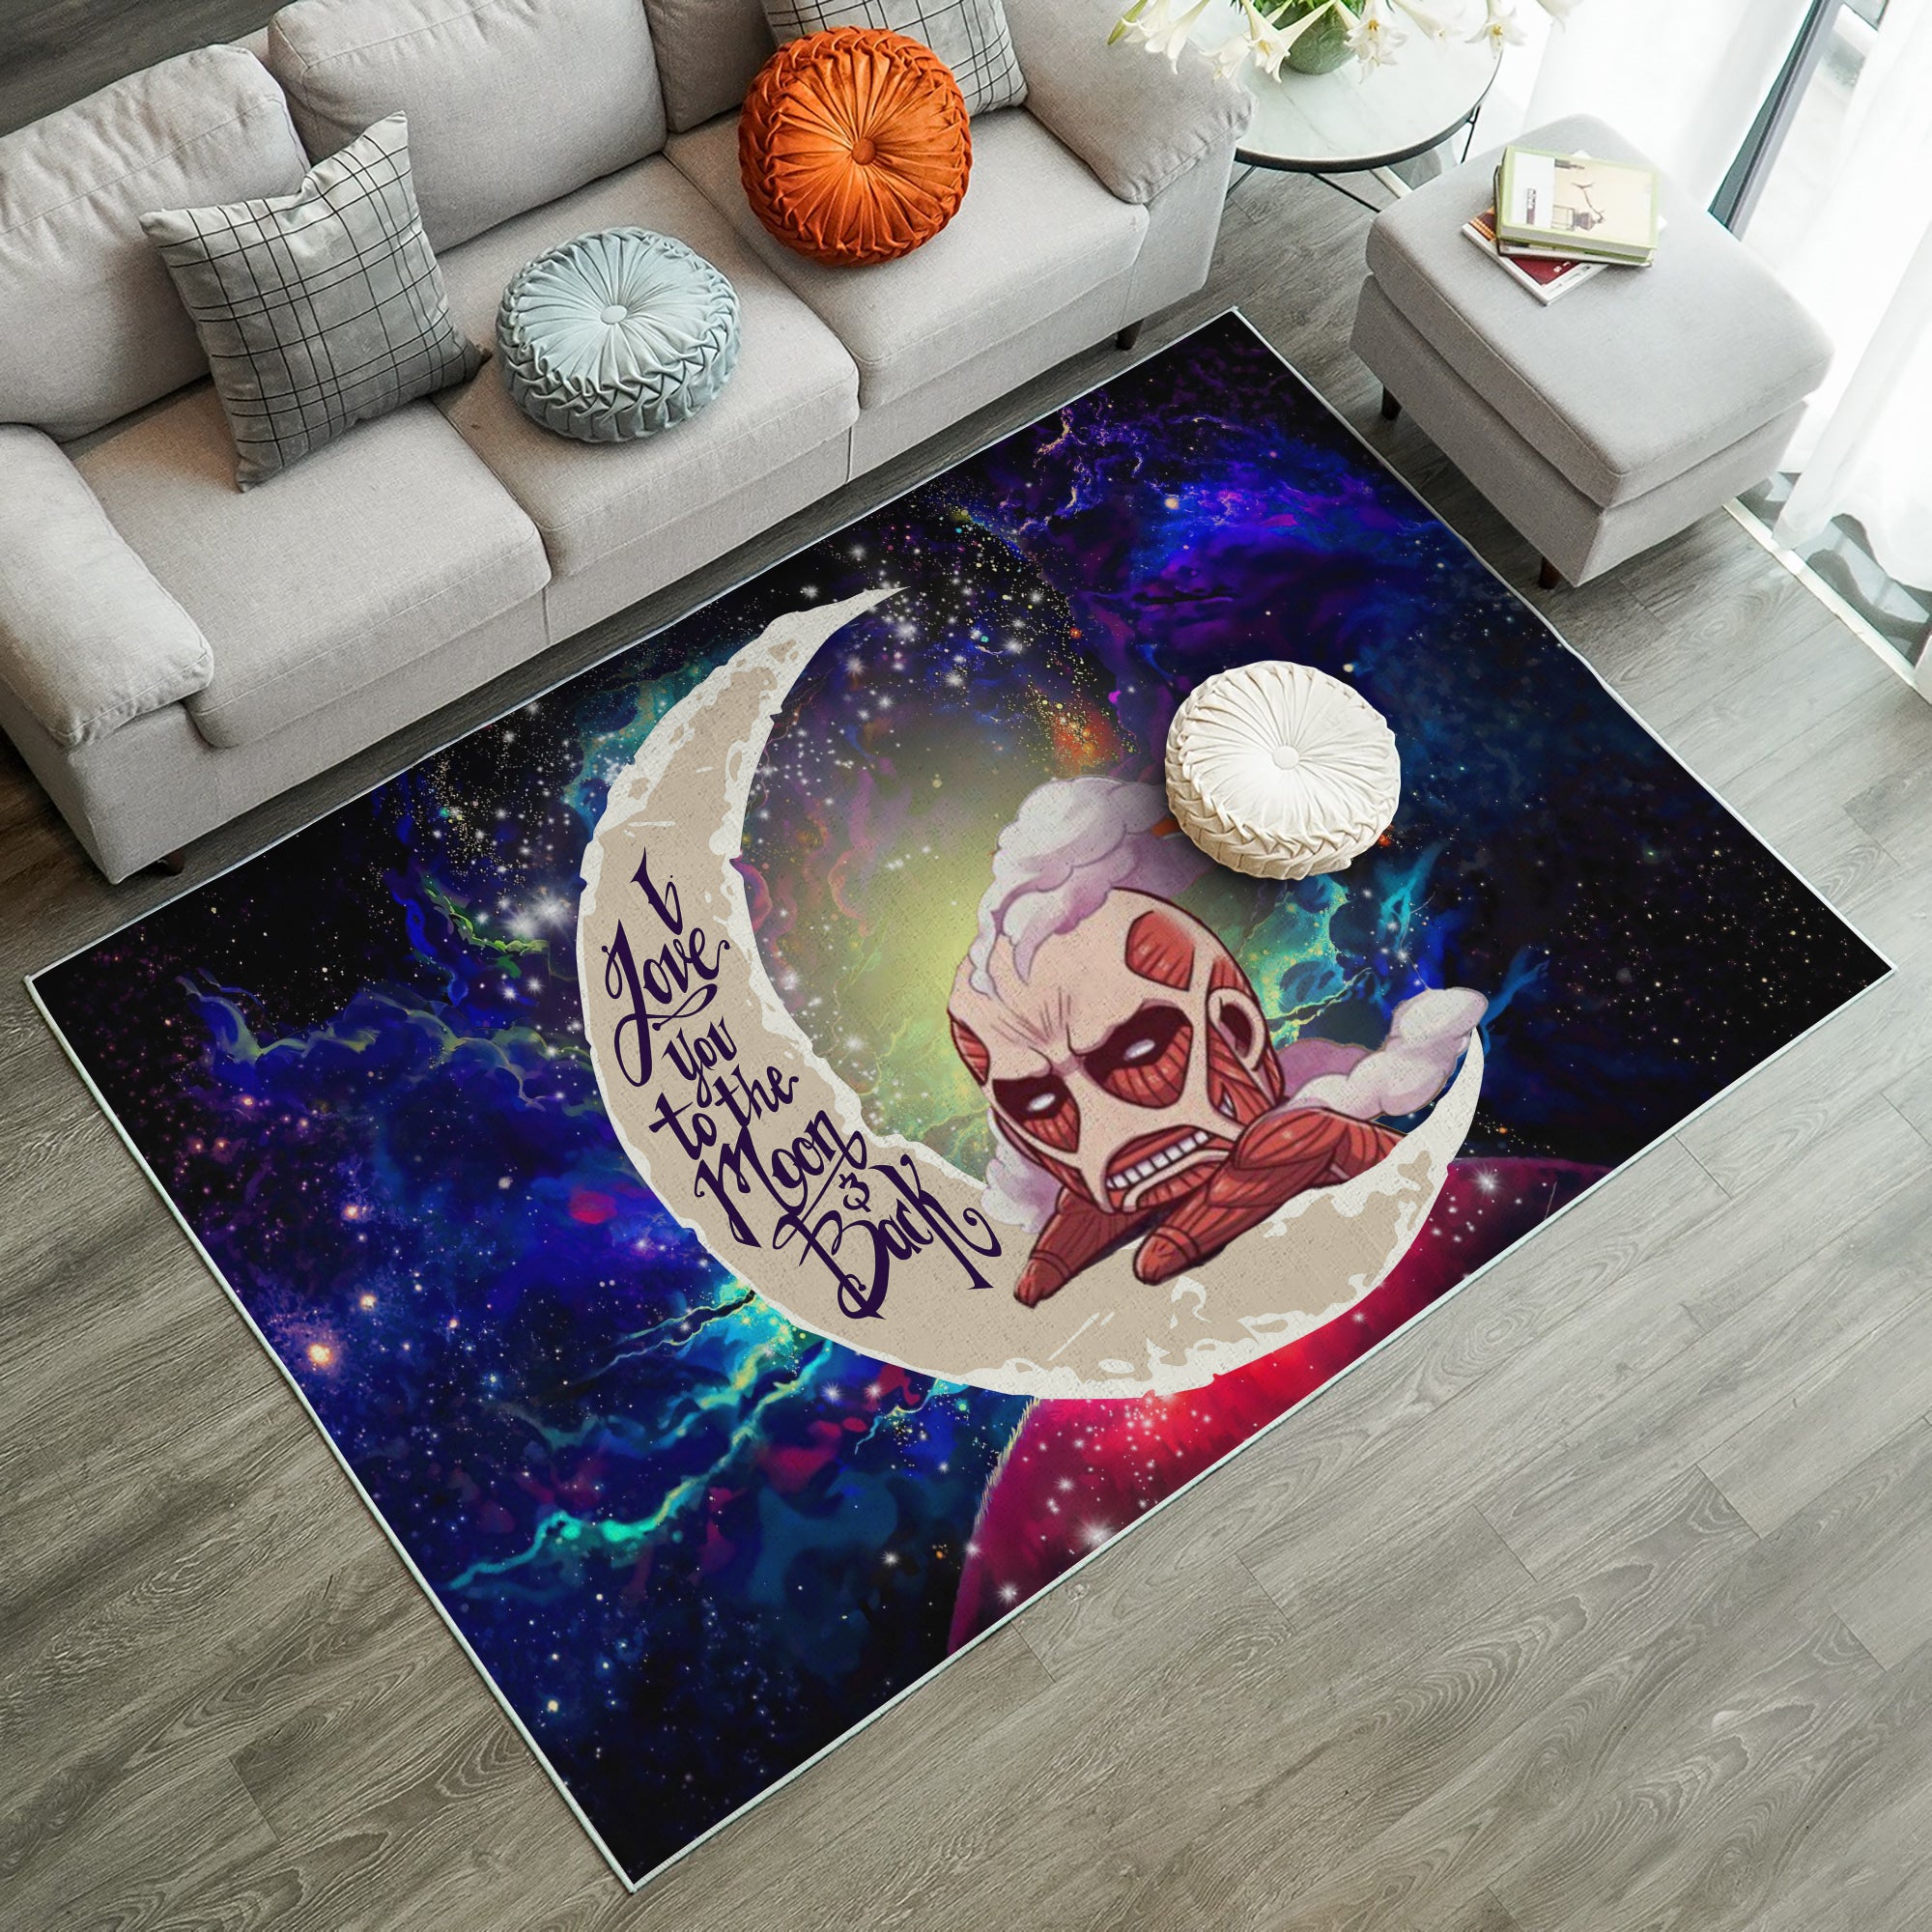 Attack on titan Love You To The Moon Galaxy Carpet Rug Home Room Decor